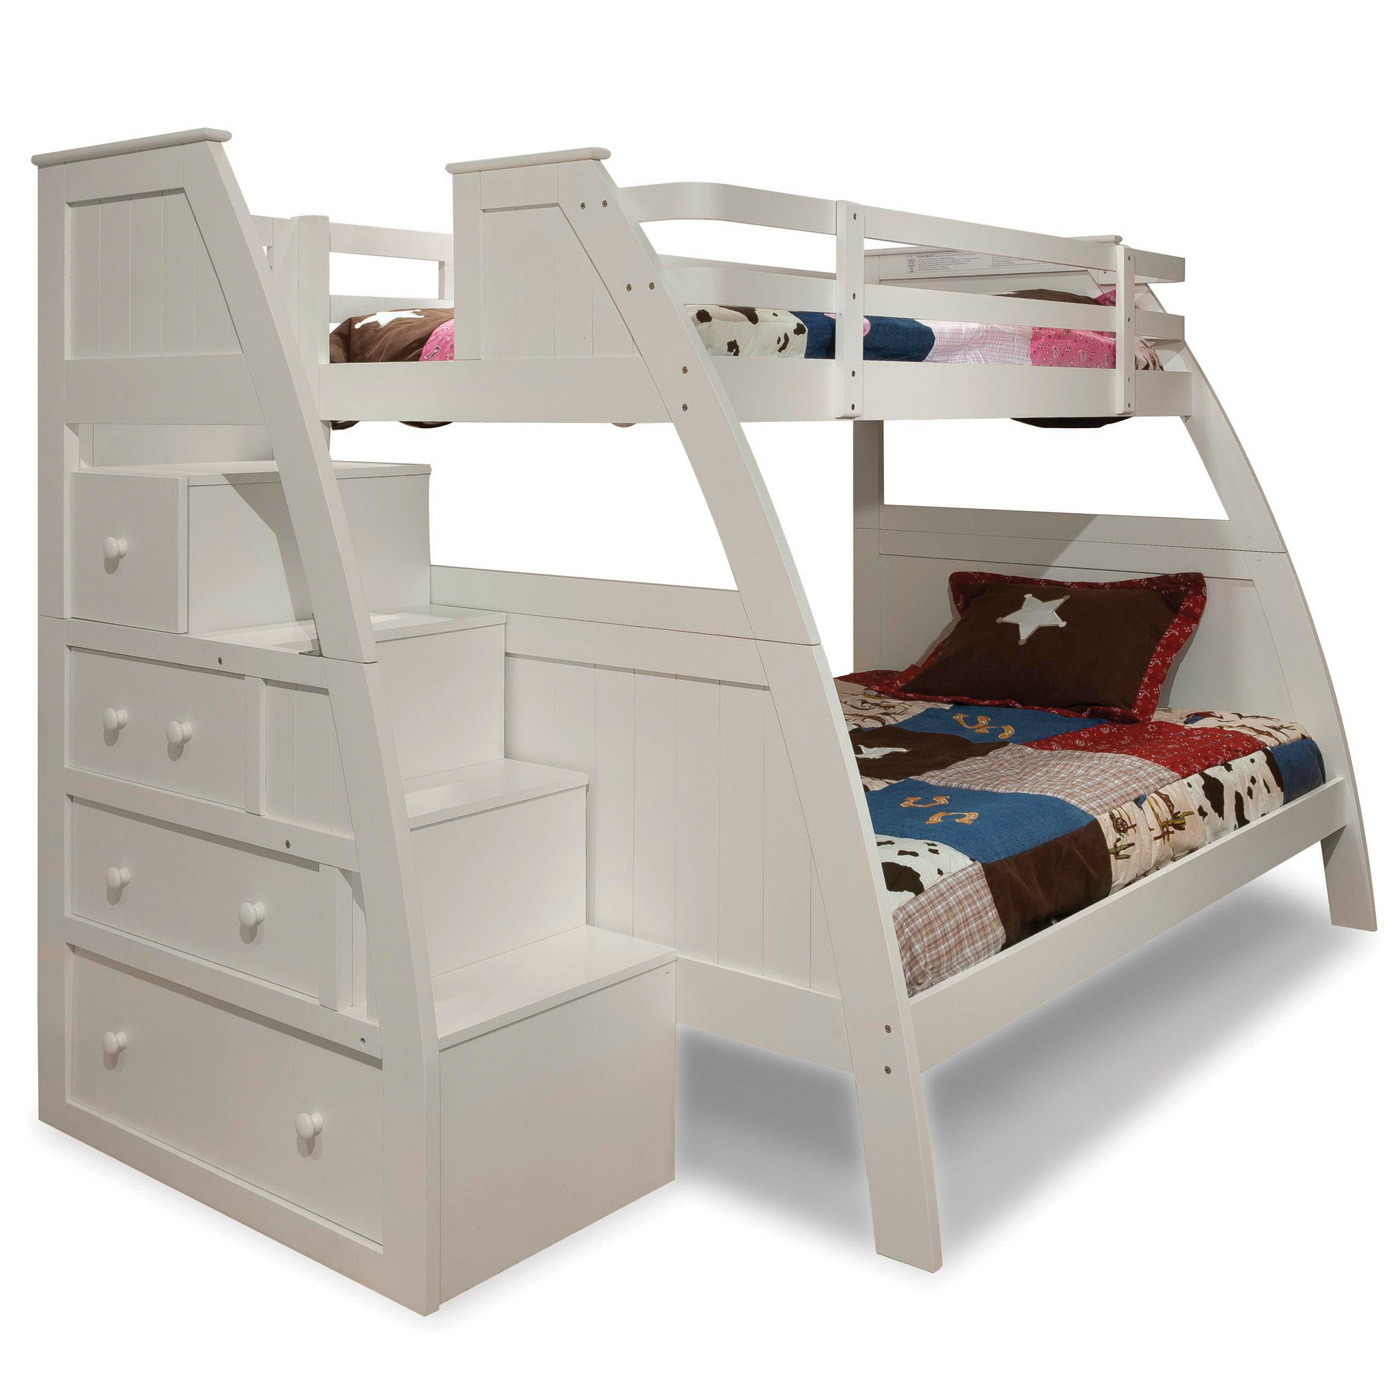 Check out other gallery of bunk beds with stairs twin